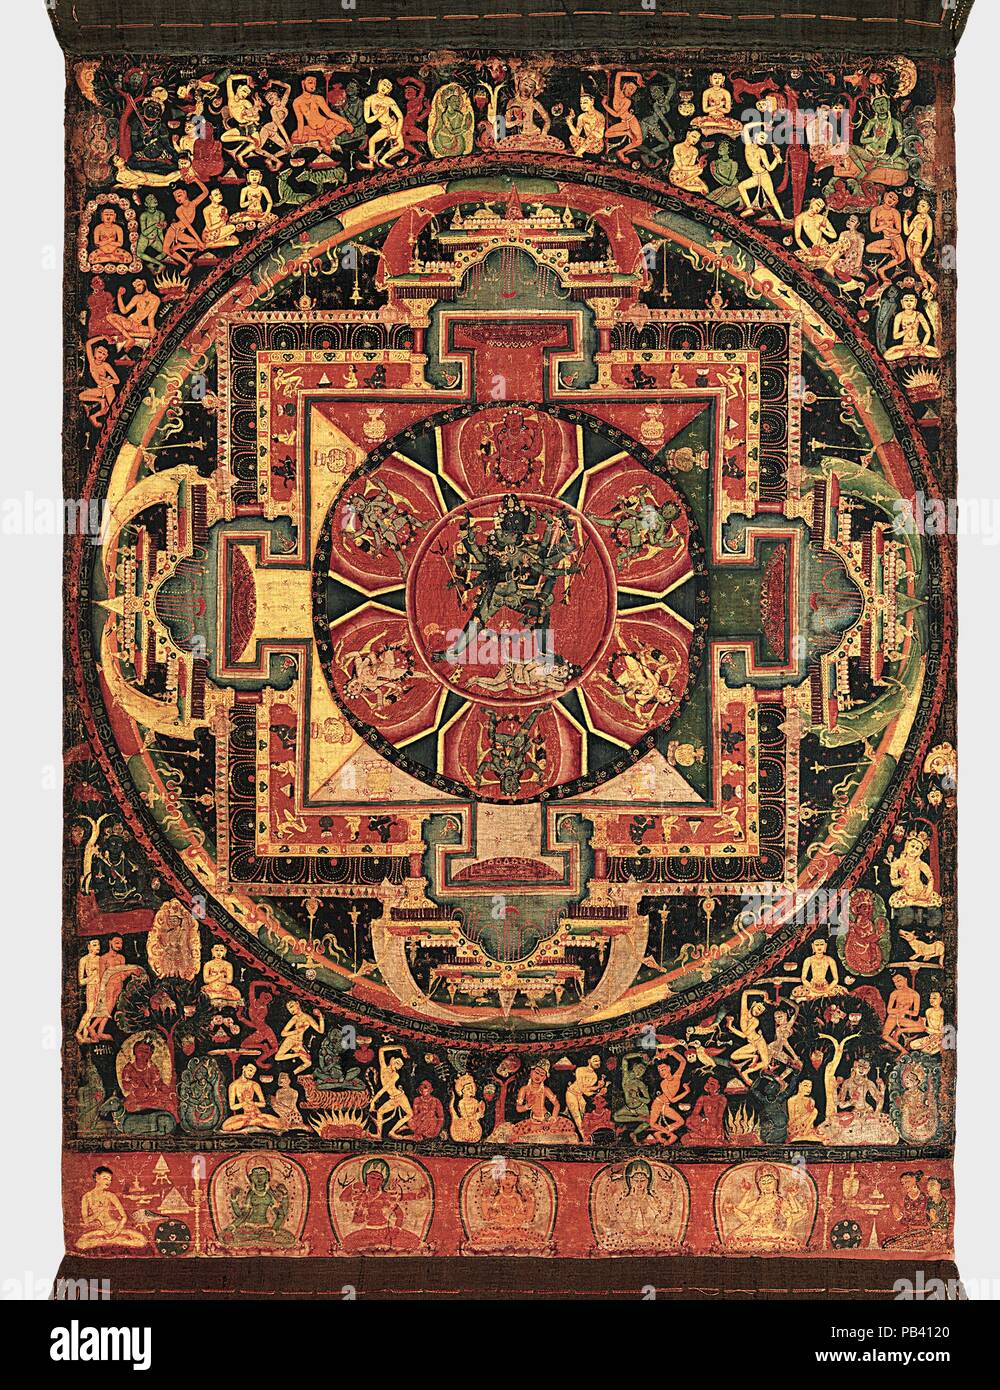 Chakrasamvara Mandala. Culture: Nepal. Dimensions: Image: 26 1/2 x 19 3/4 in. (67.3 x 50.2 cm); Framed: 48 x 33 in. (121.9 x 83.8 cm). Date: ca. 1100.  This ritual diagram (mandala) is conceived as the cosmic palace of the wrathful Chakrasamvara and his consort, Vajravarahi, seen at center. These deities embody the esoteric knowledge of the Yoga Tantras. Six goddesses on stylized lotus petals surround the divine couple. Framing the mandala are the eight great burial grounds of India, each presided over by a deity beneath a tree. The cemeteries are appropriate places for meditation on Chakrasam Stock Photo